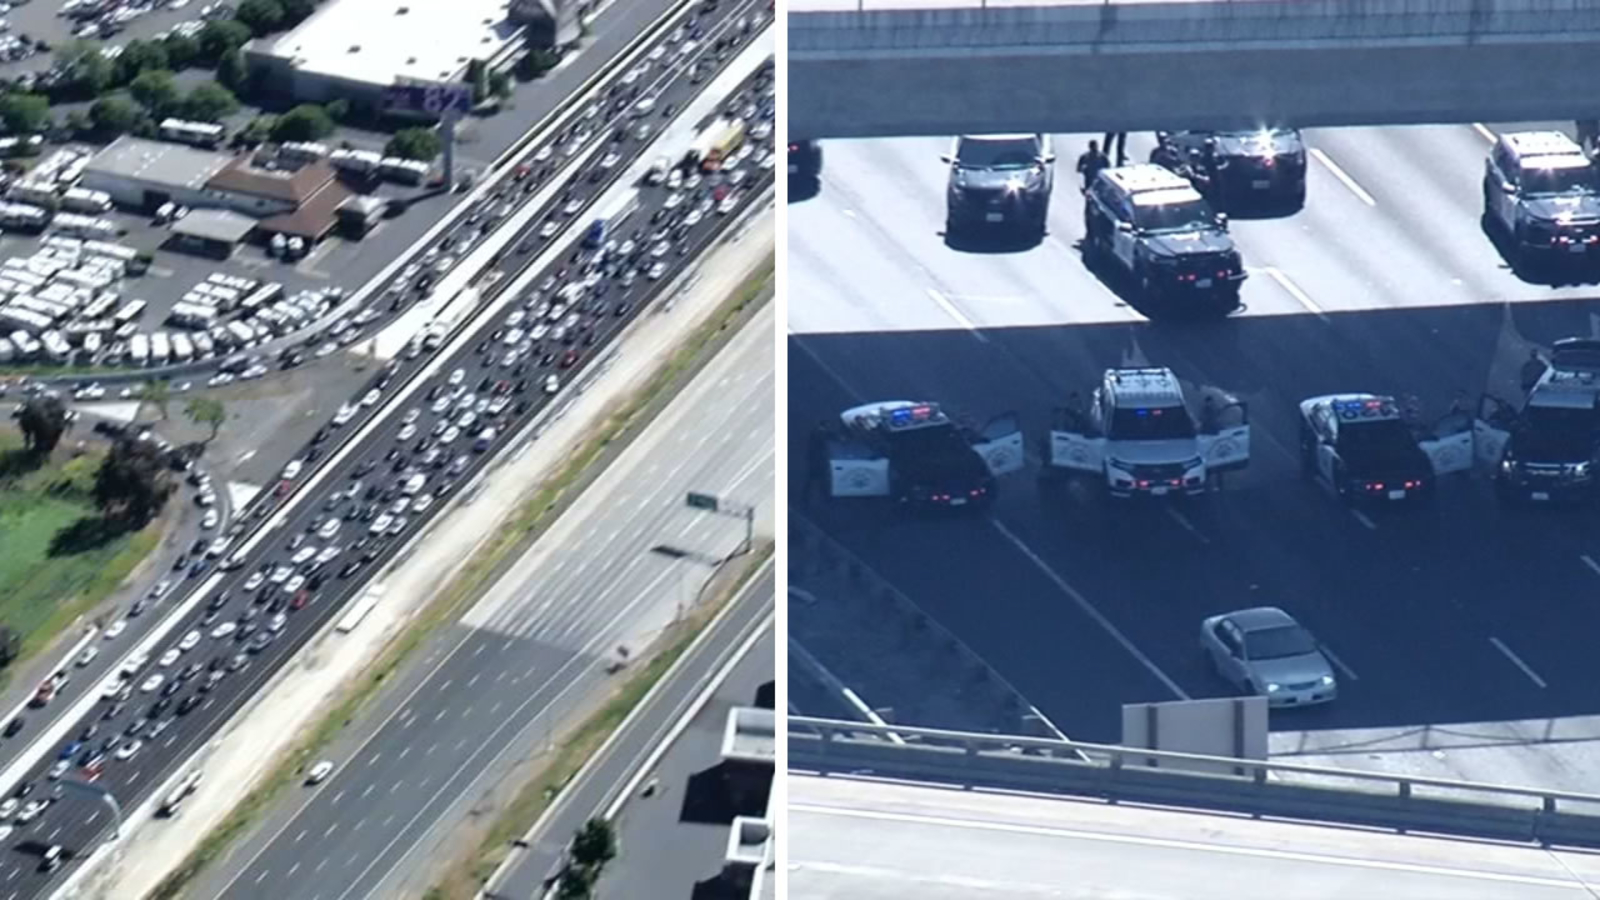 Bay Area I-80 standoff: Suspect who shot himself still alive at hospital in critical condition, CHP says [Video]